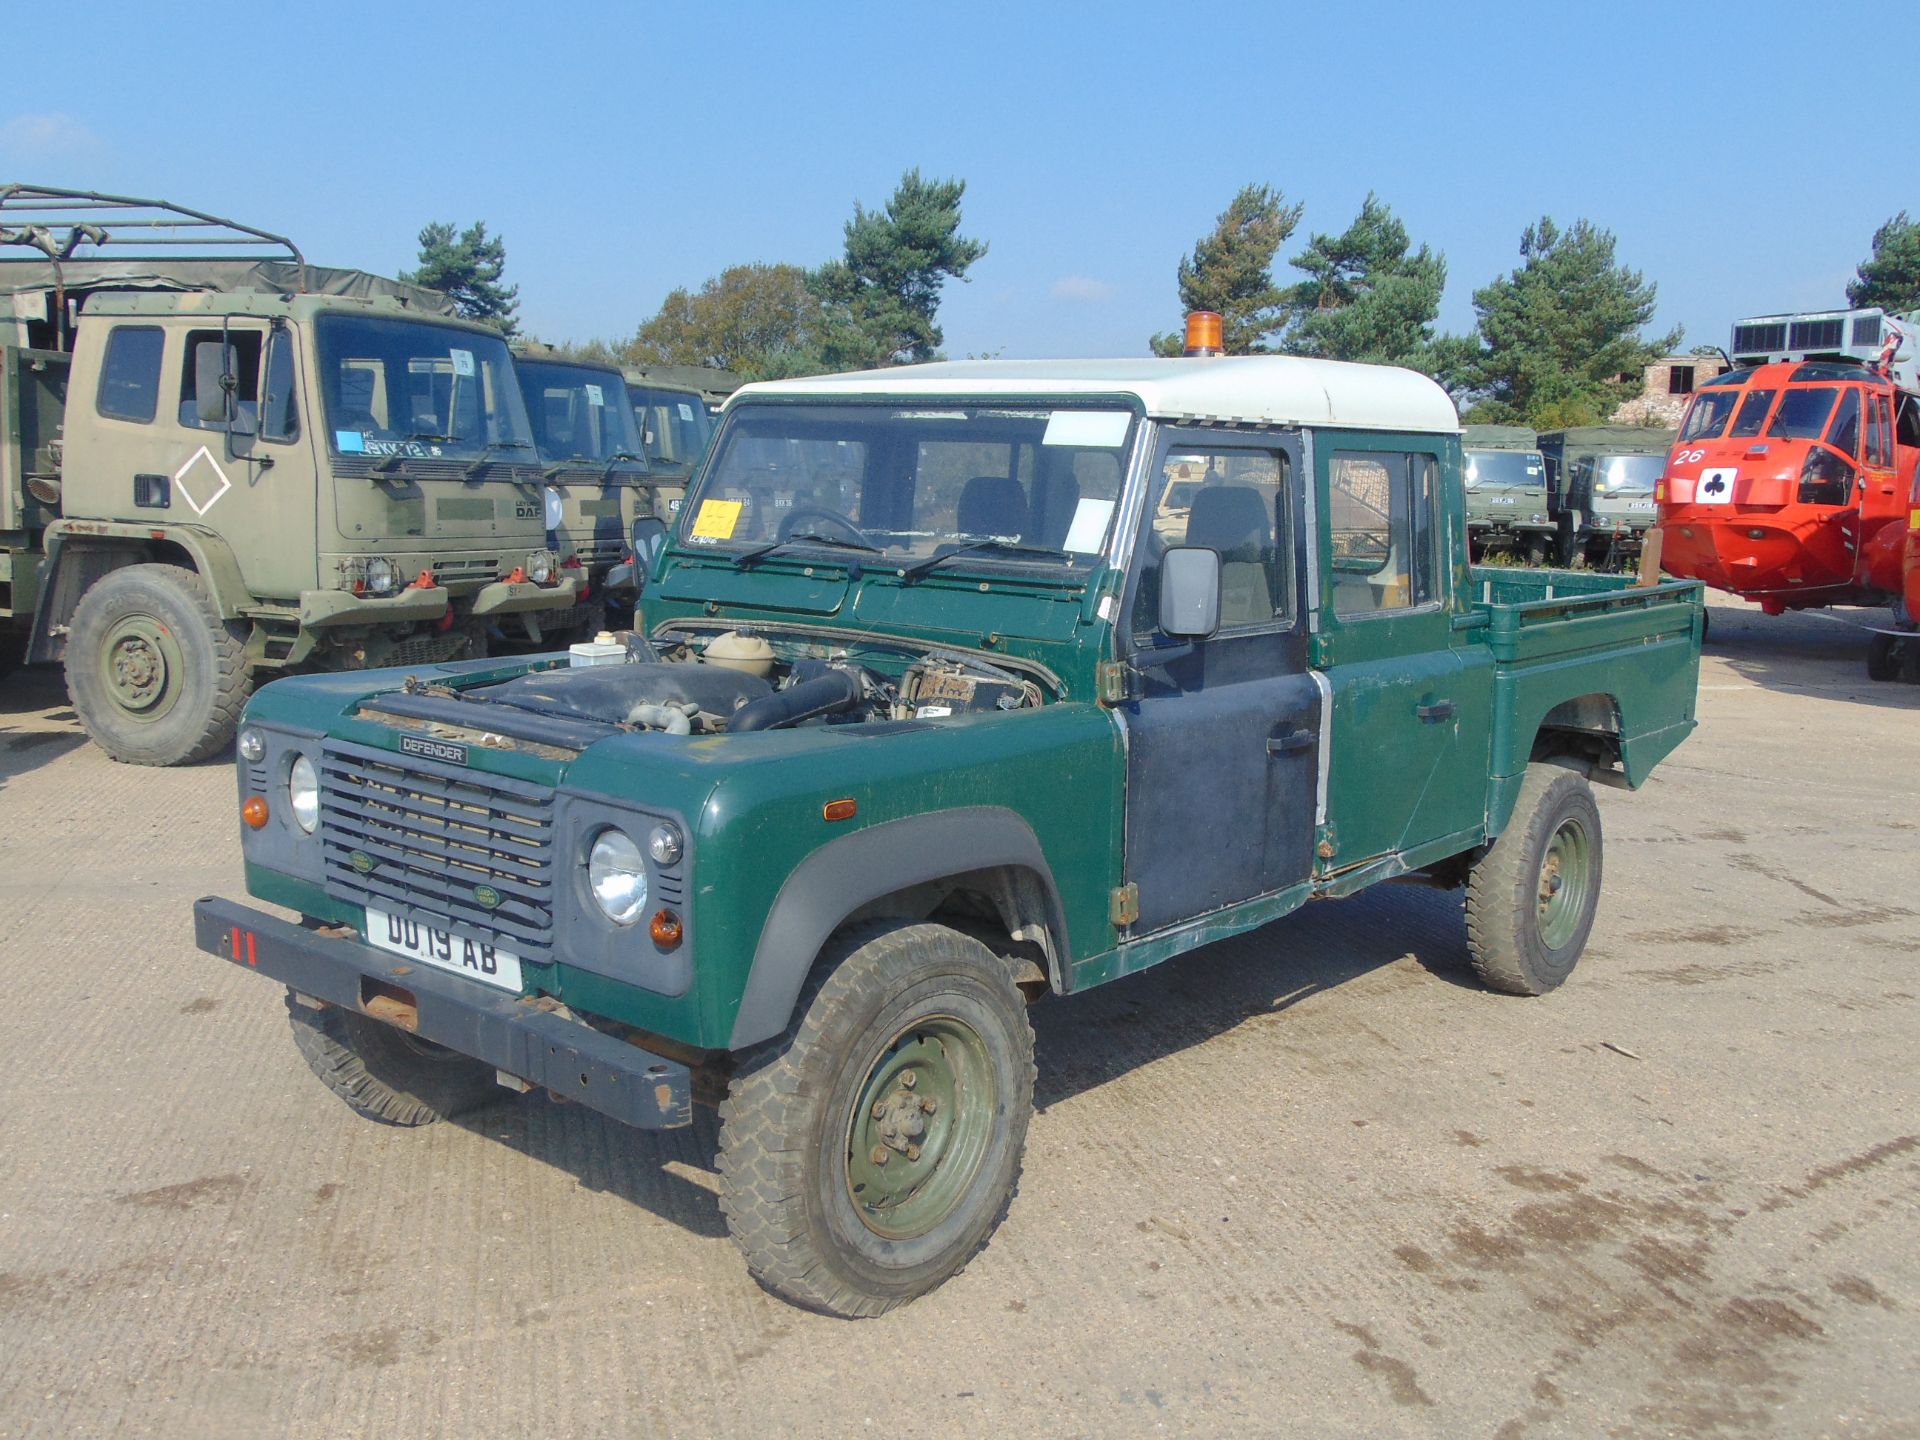 Land Rover Defender 130 TD5 Double Cab Pick Up